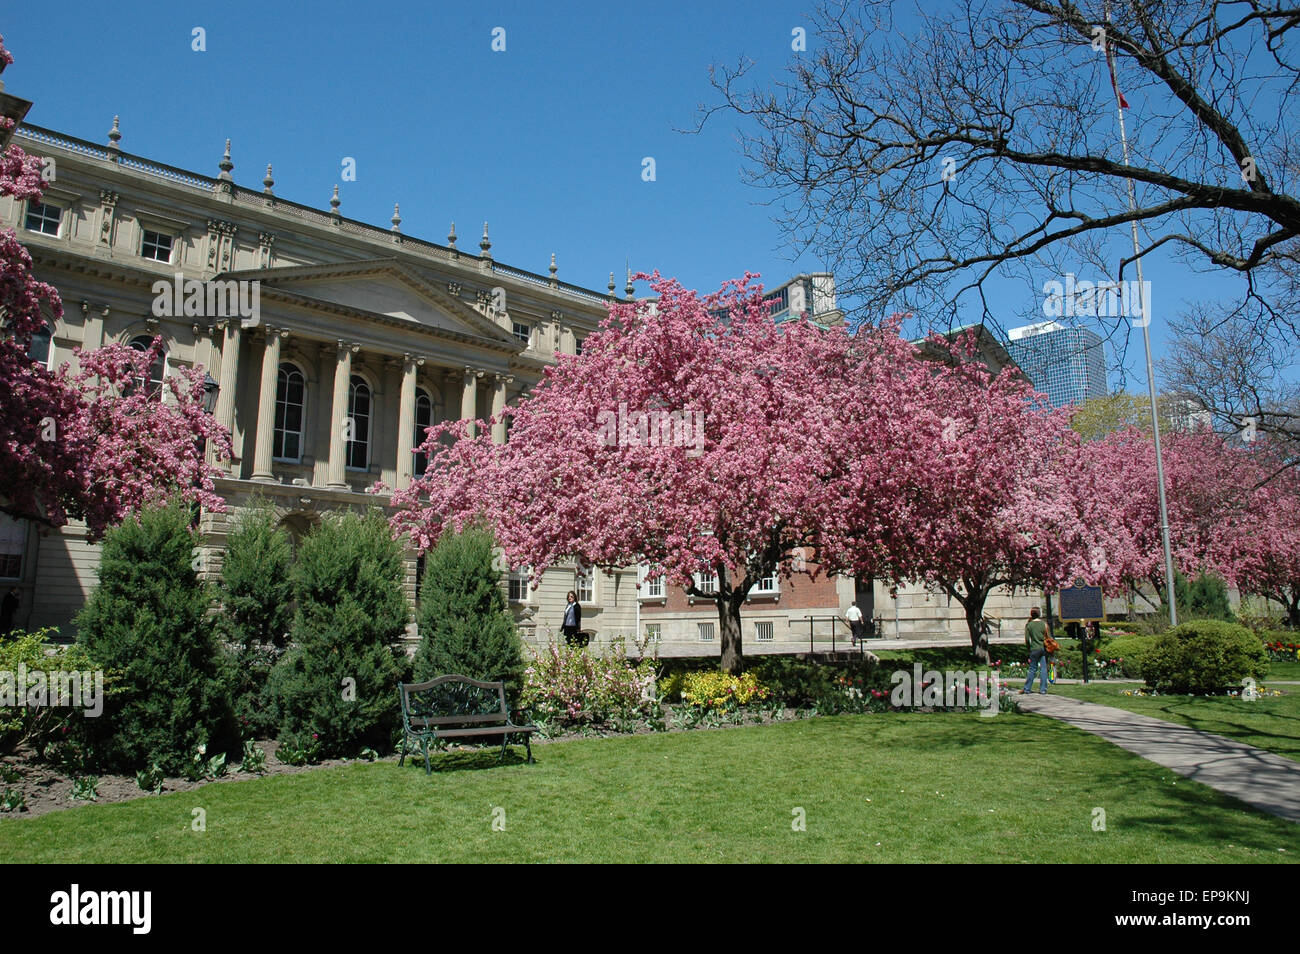 Toronto, Canada: Osgoode Hall, a landmark building in downtown Toronto constructed between 1829 and 1832 Stock Photo